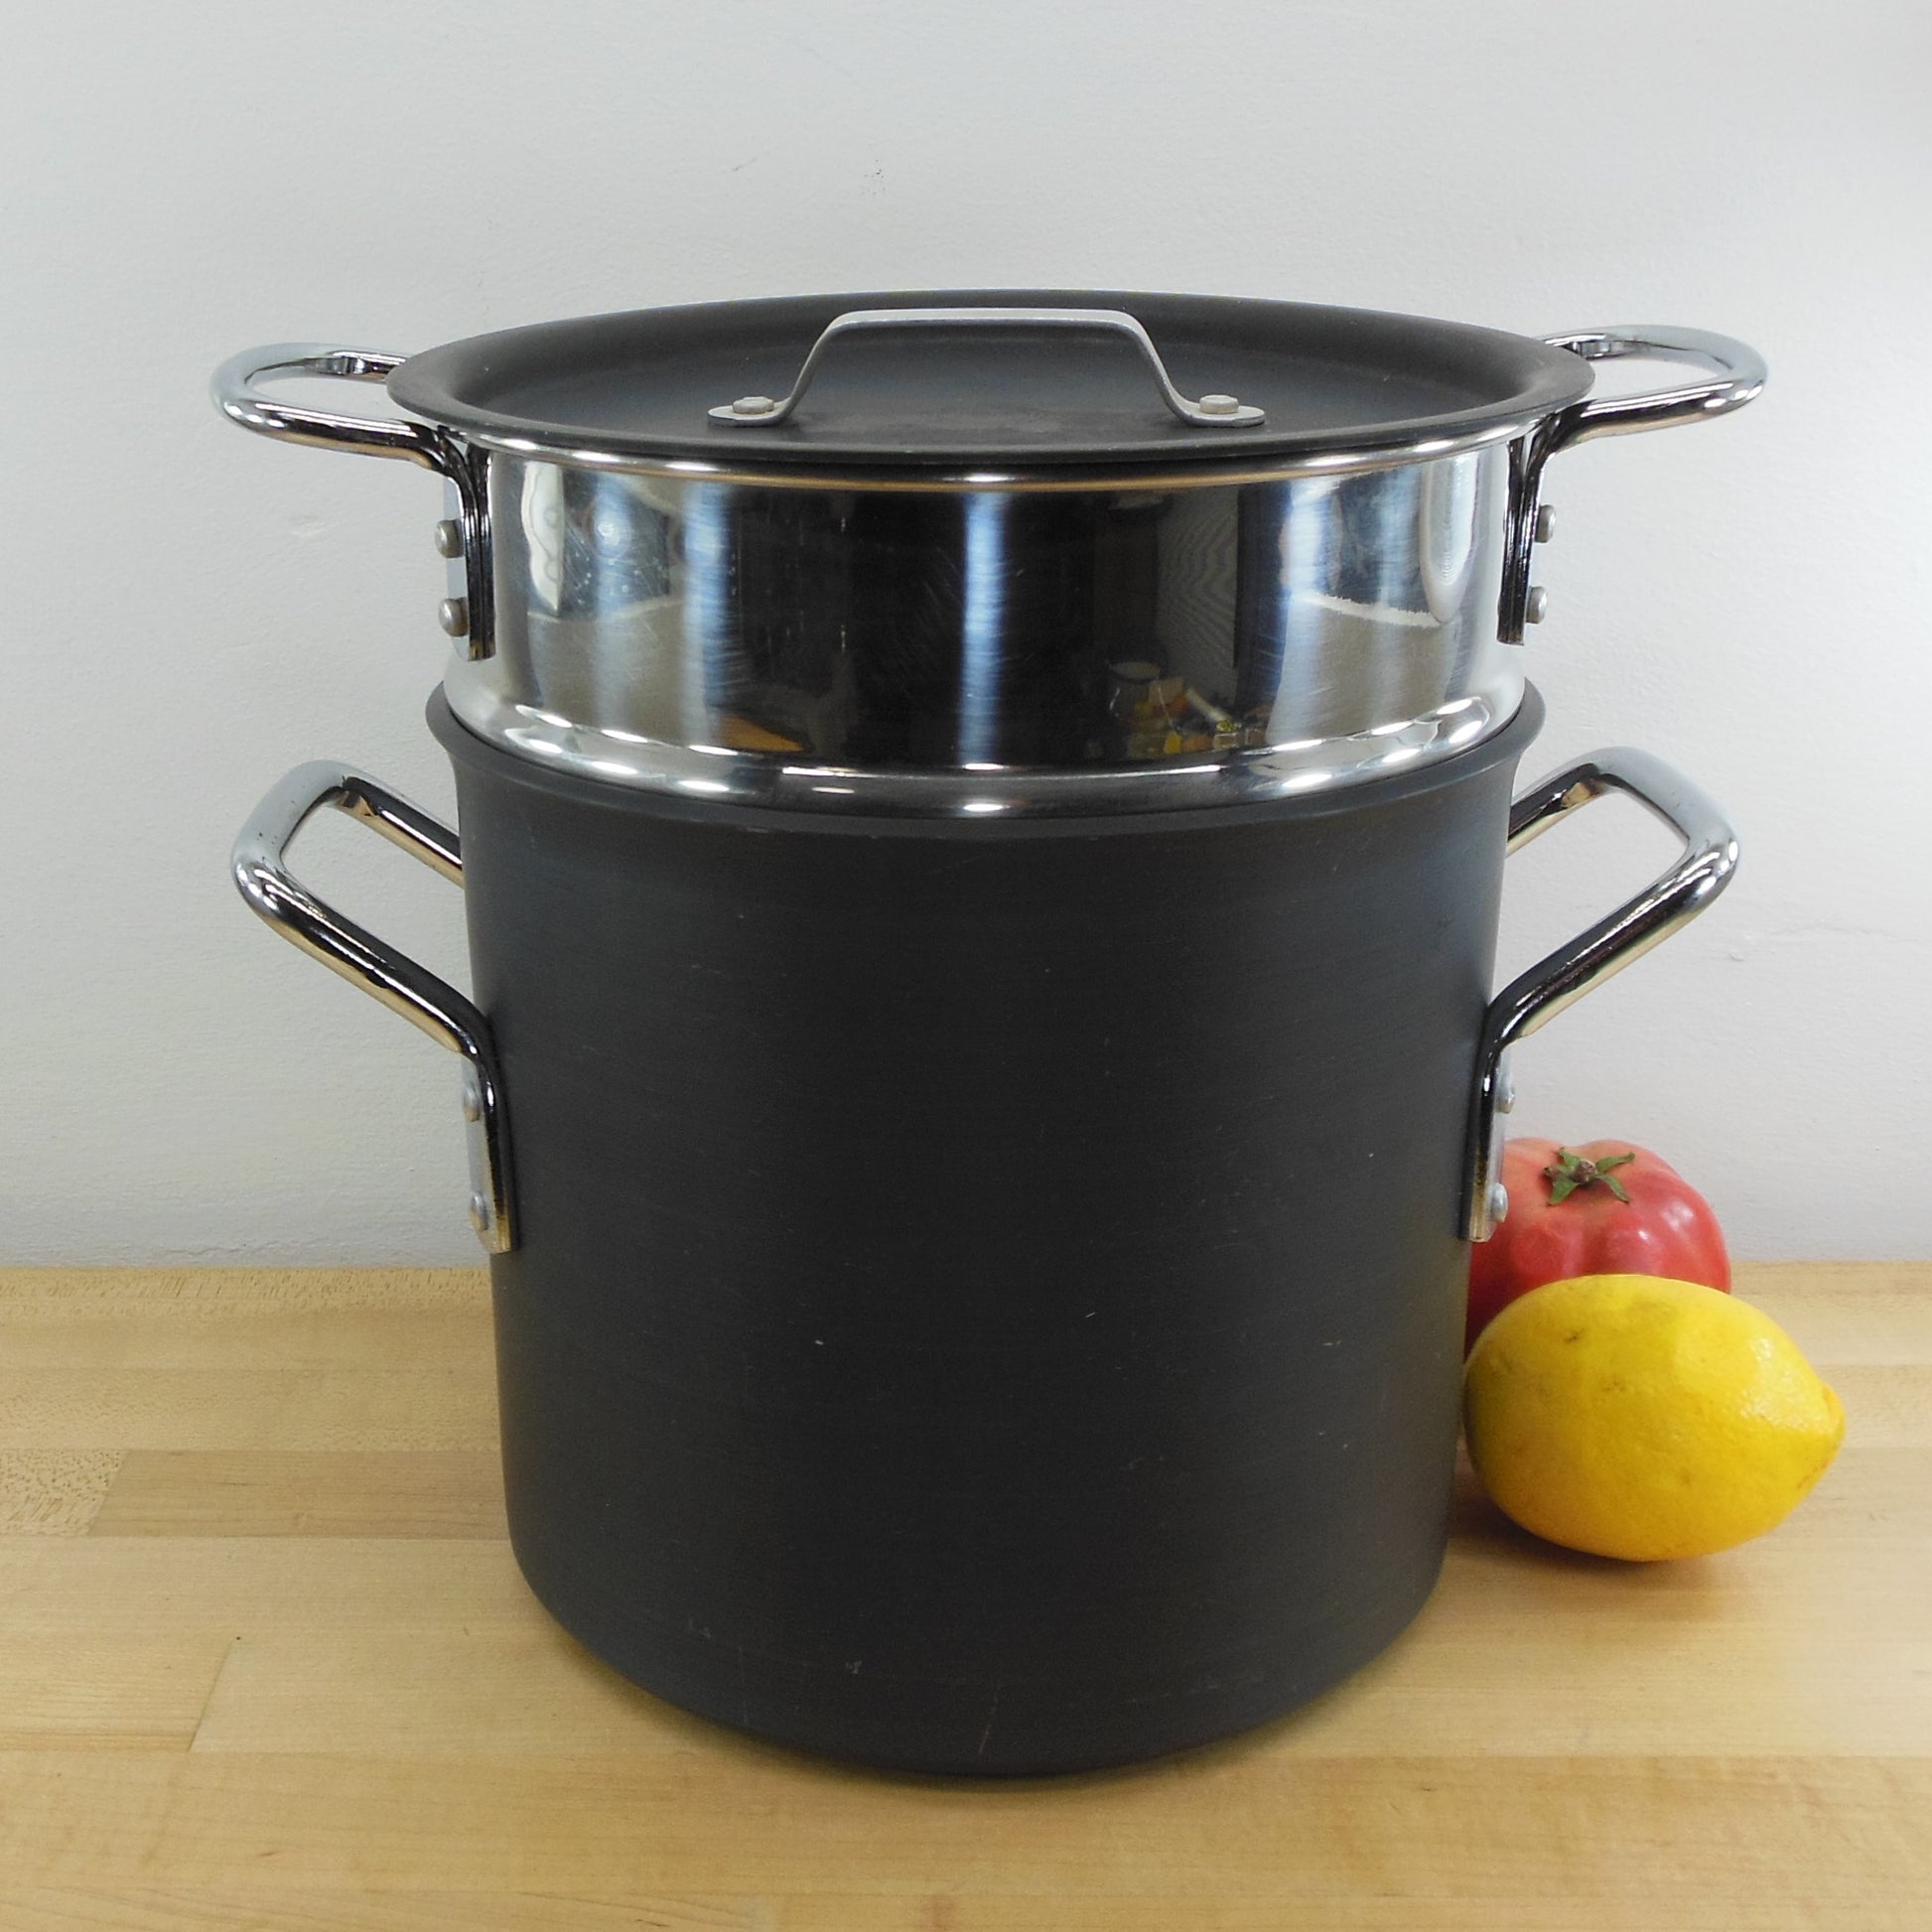 Calphalon USA Anodized 8 Qt Stock Pot Lid with Stainless Pasta